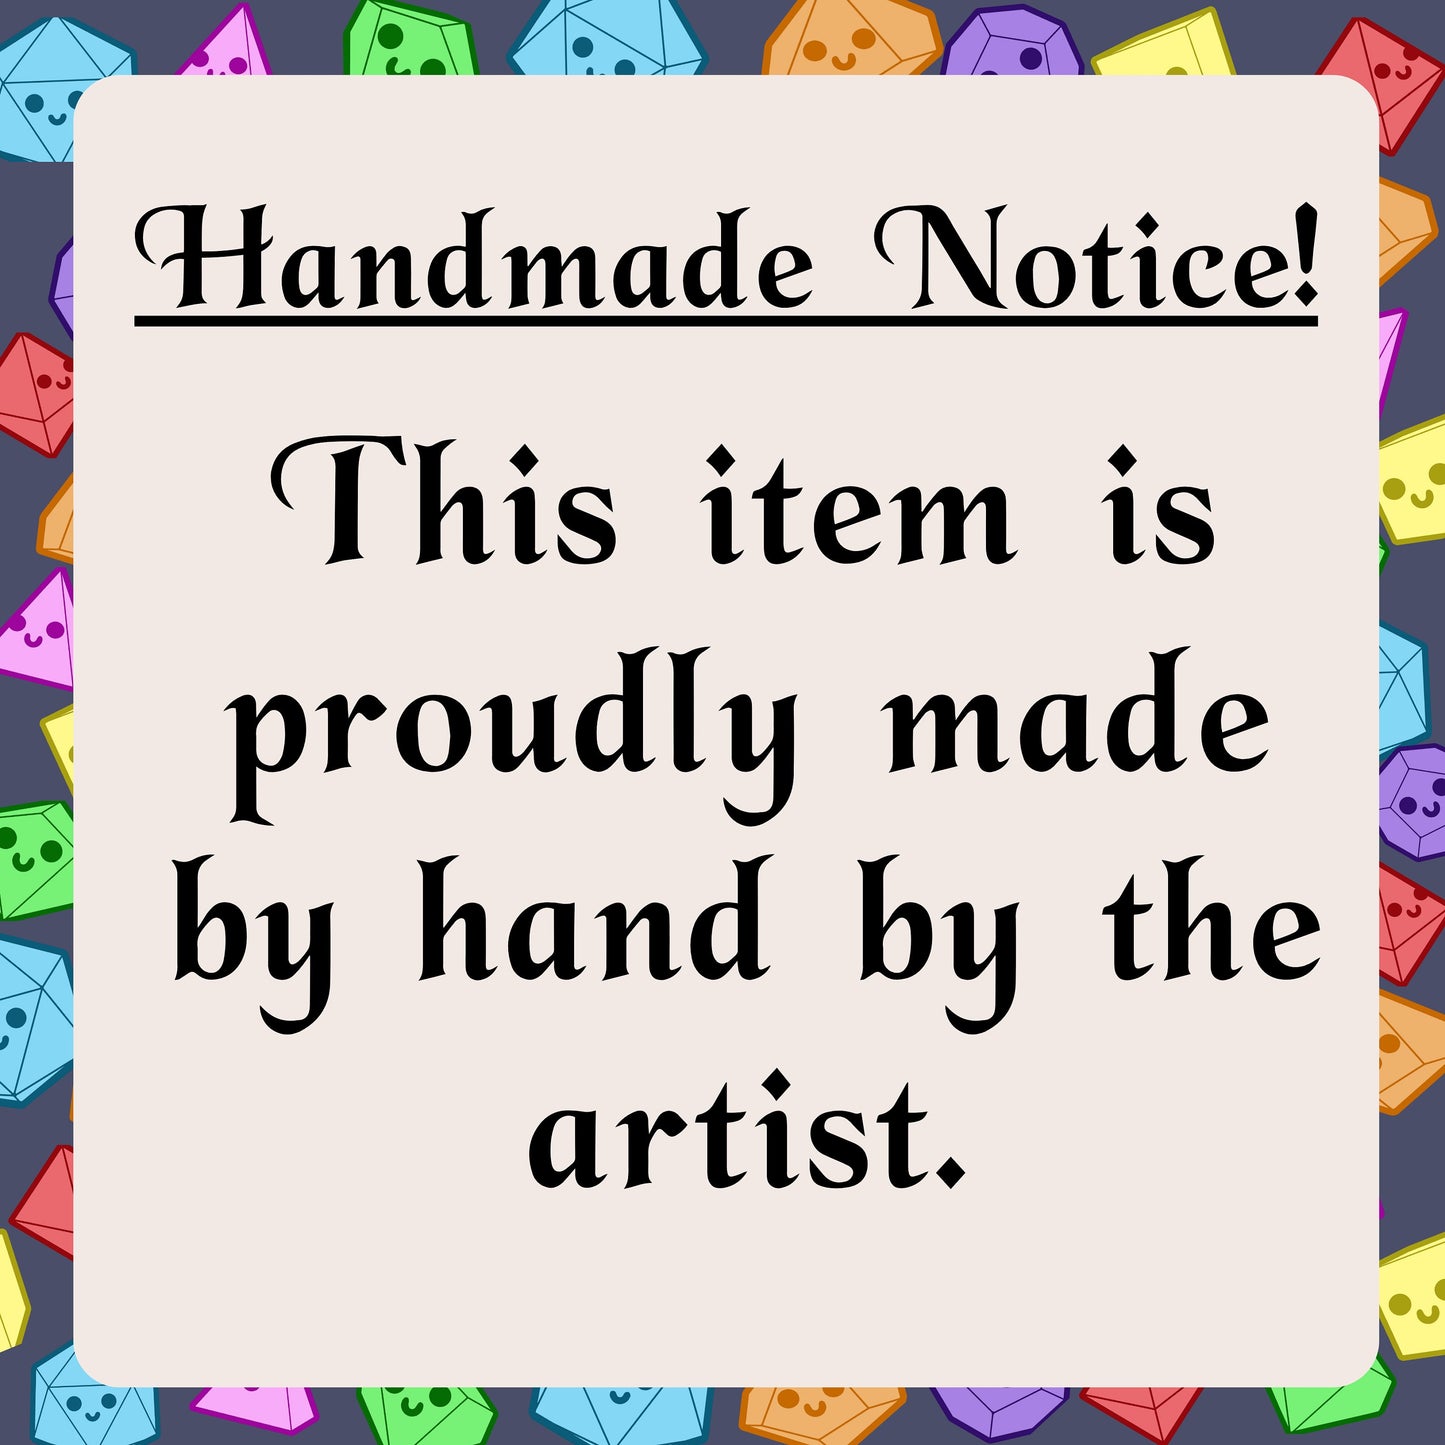 Handmade Notice: This item is proudly made by hand by the artist.